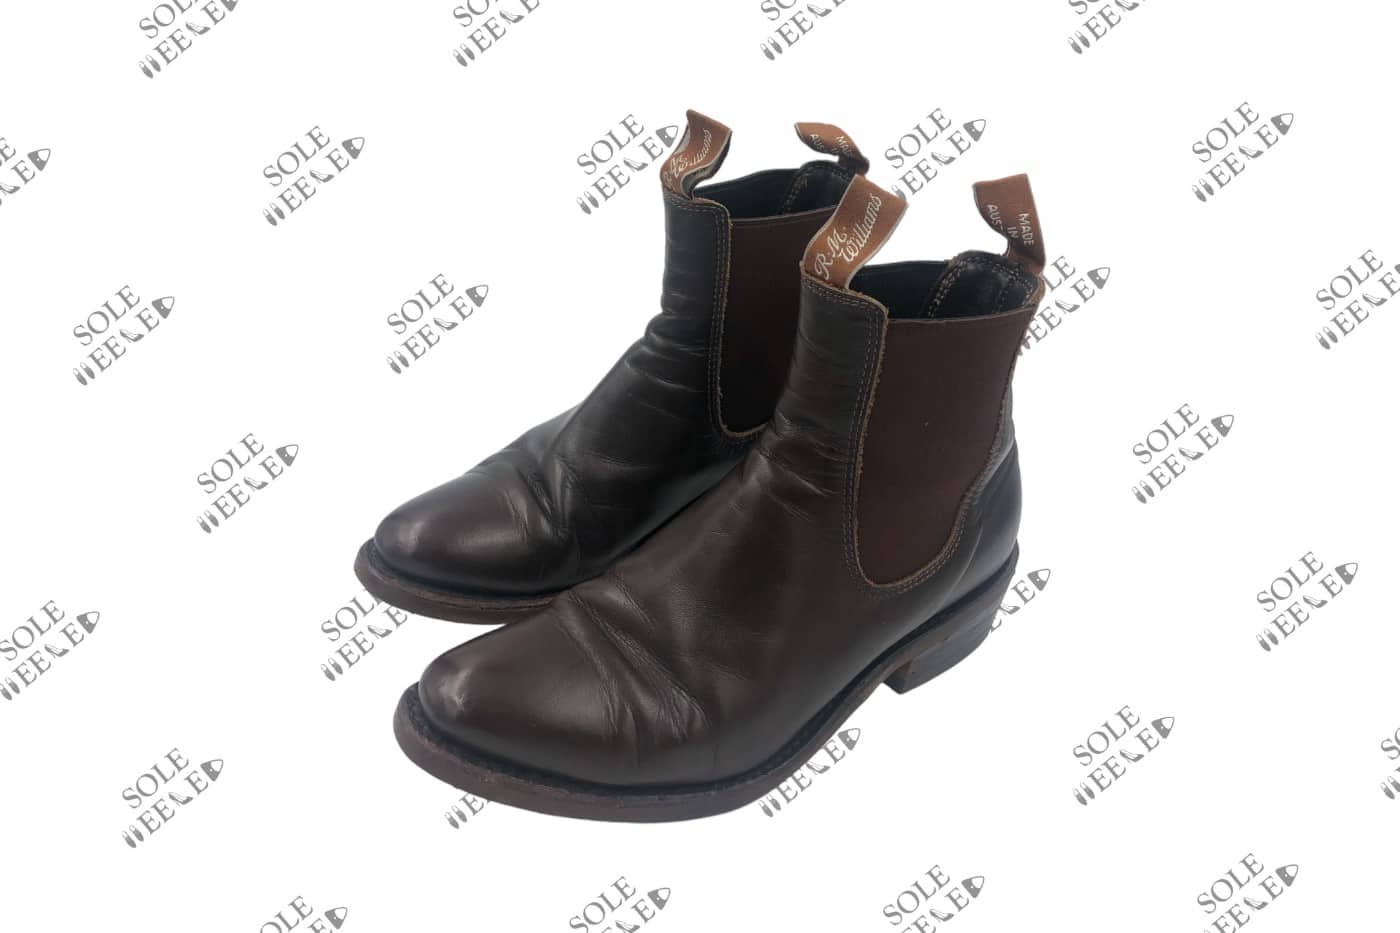 R.M. Williams Boot Gouged Leather Repair